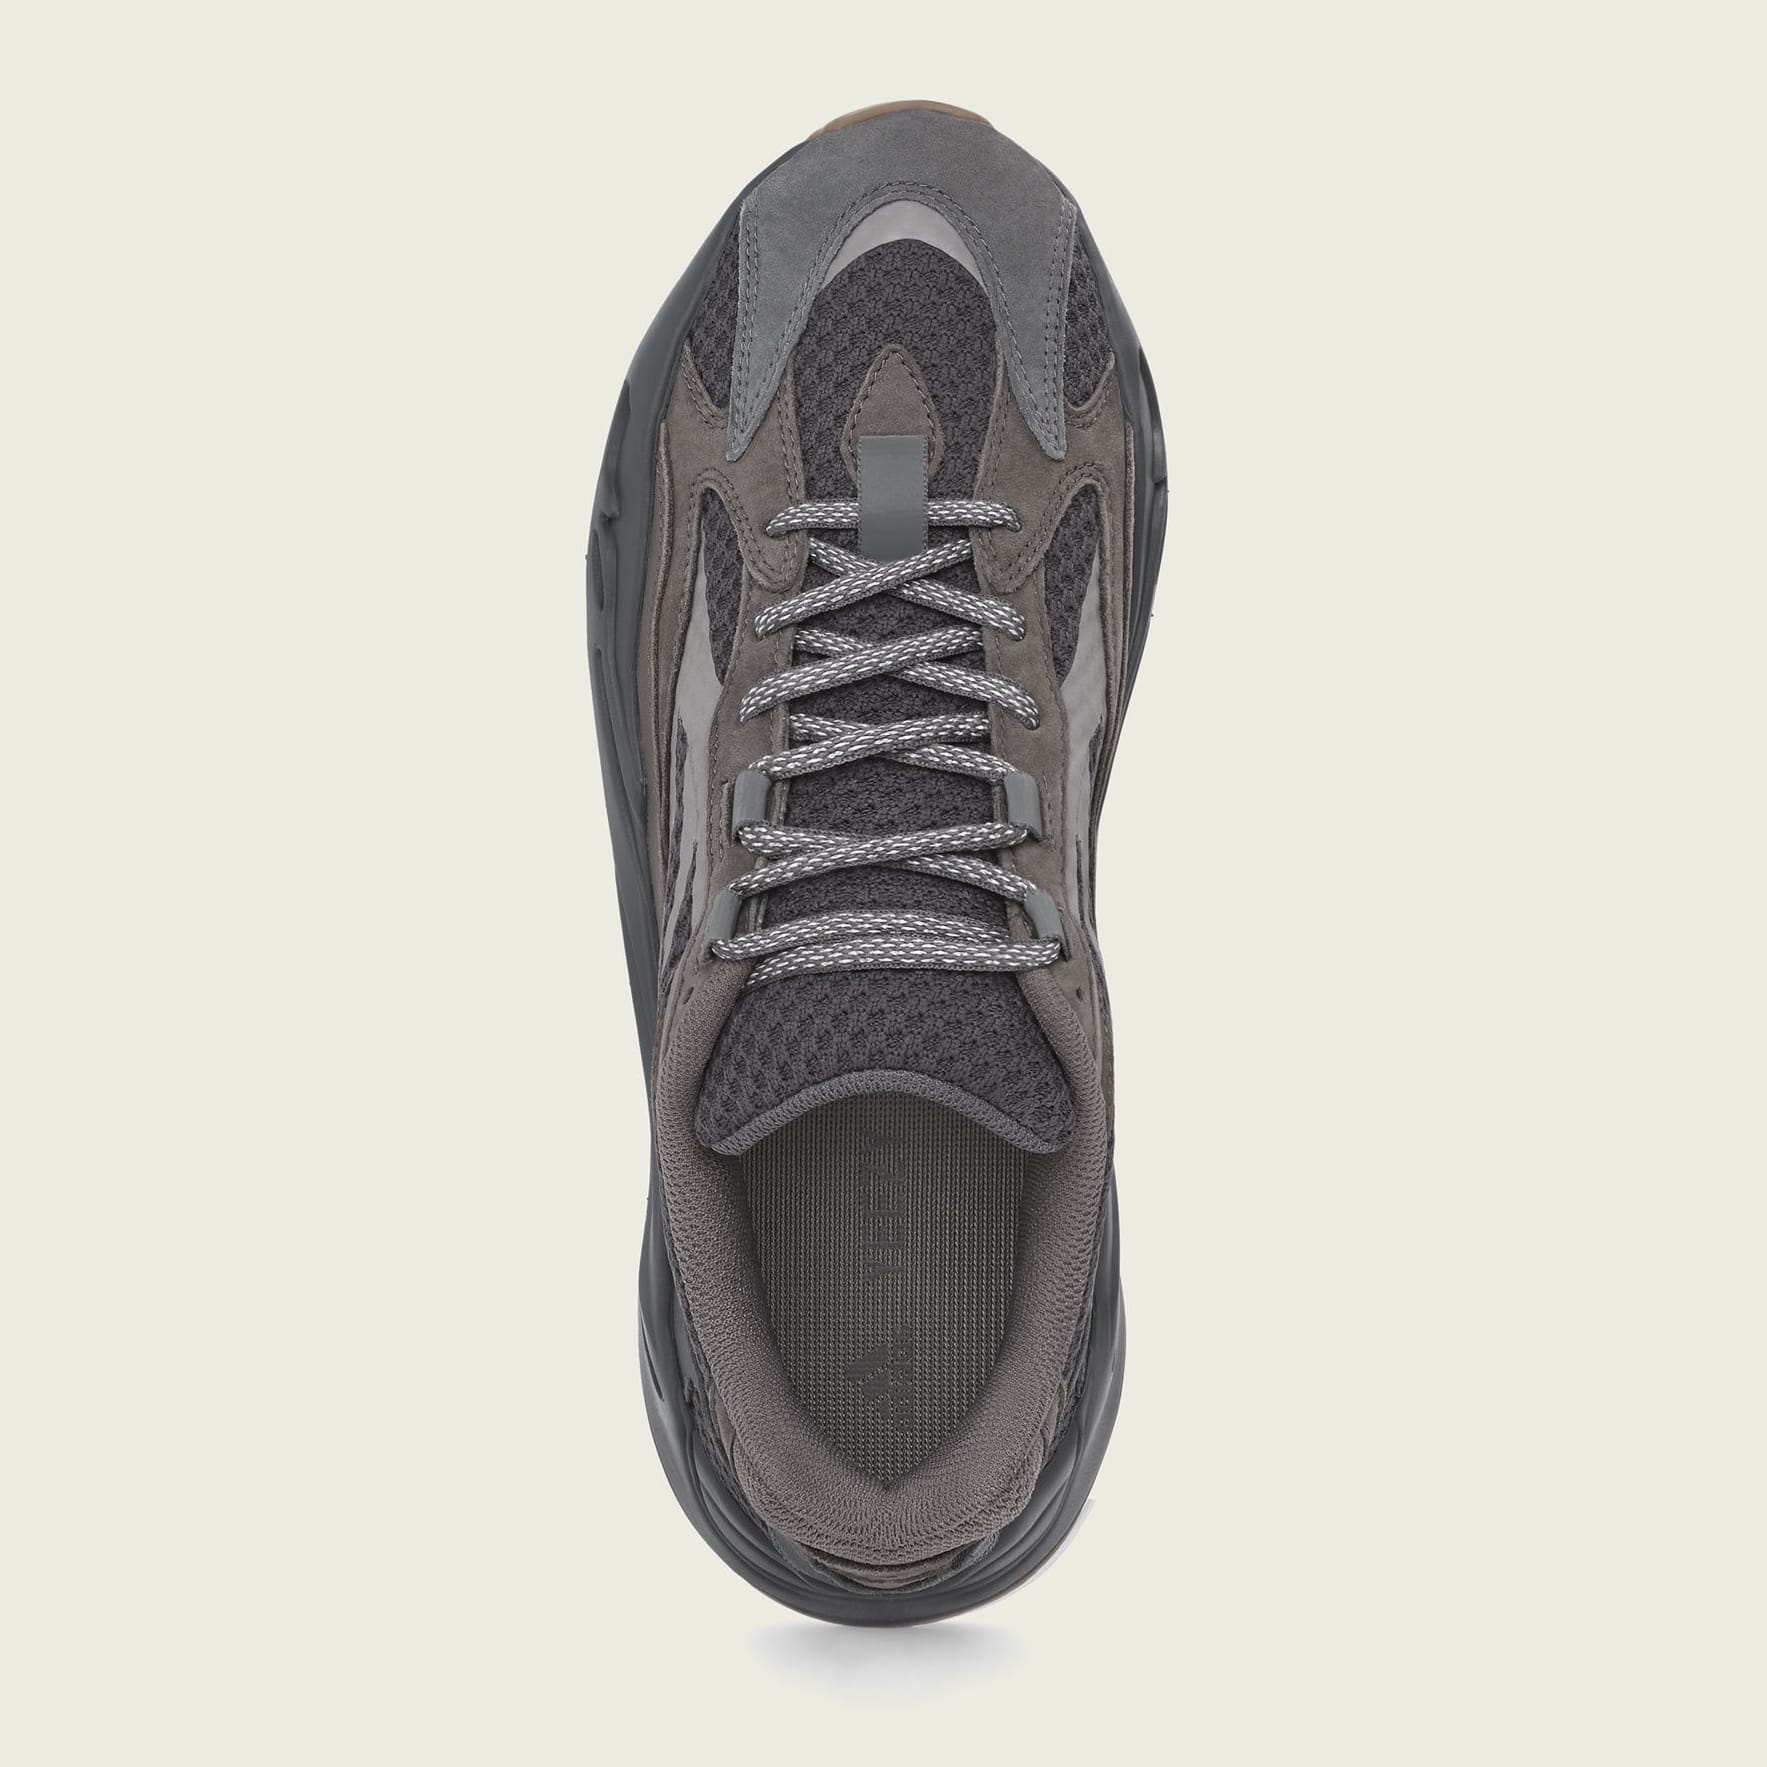 Adidas Yeezy Boost 700 V2 'Geode' Release Date | Sole Collector